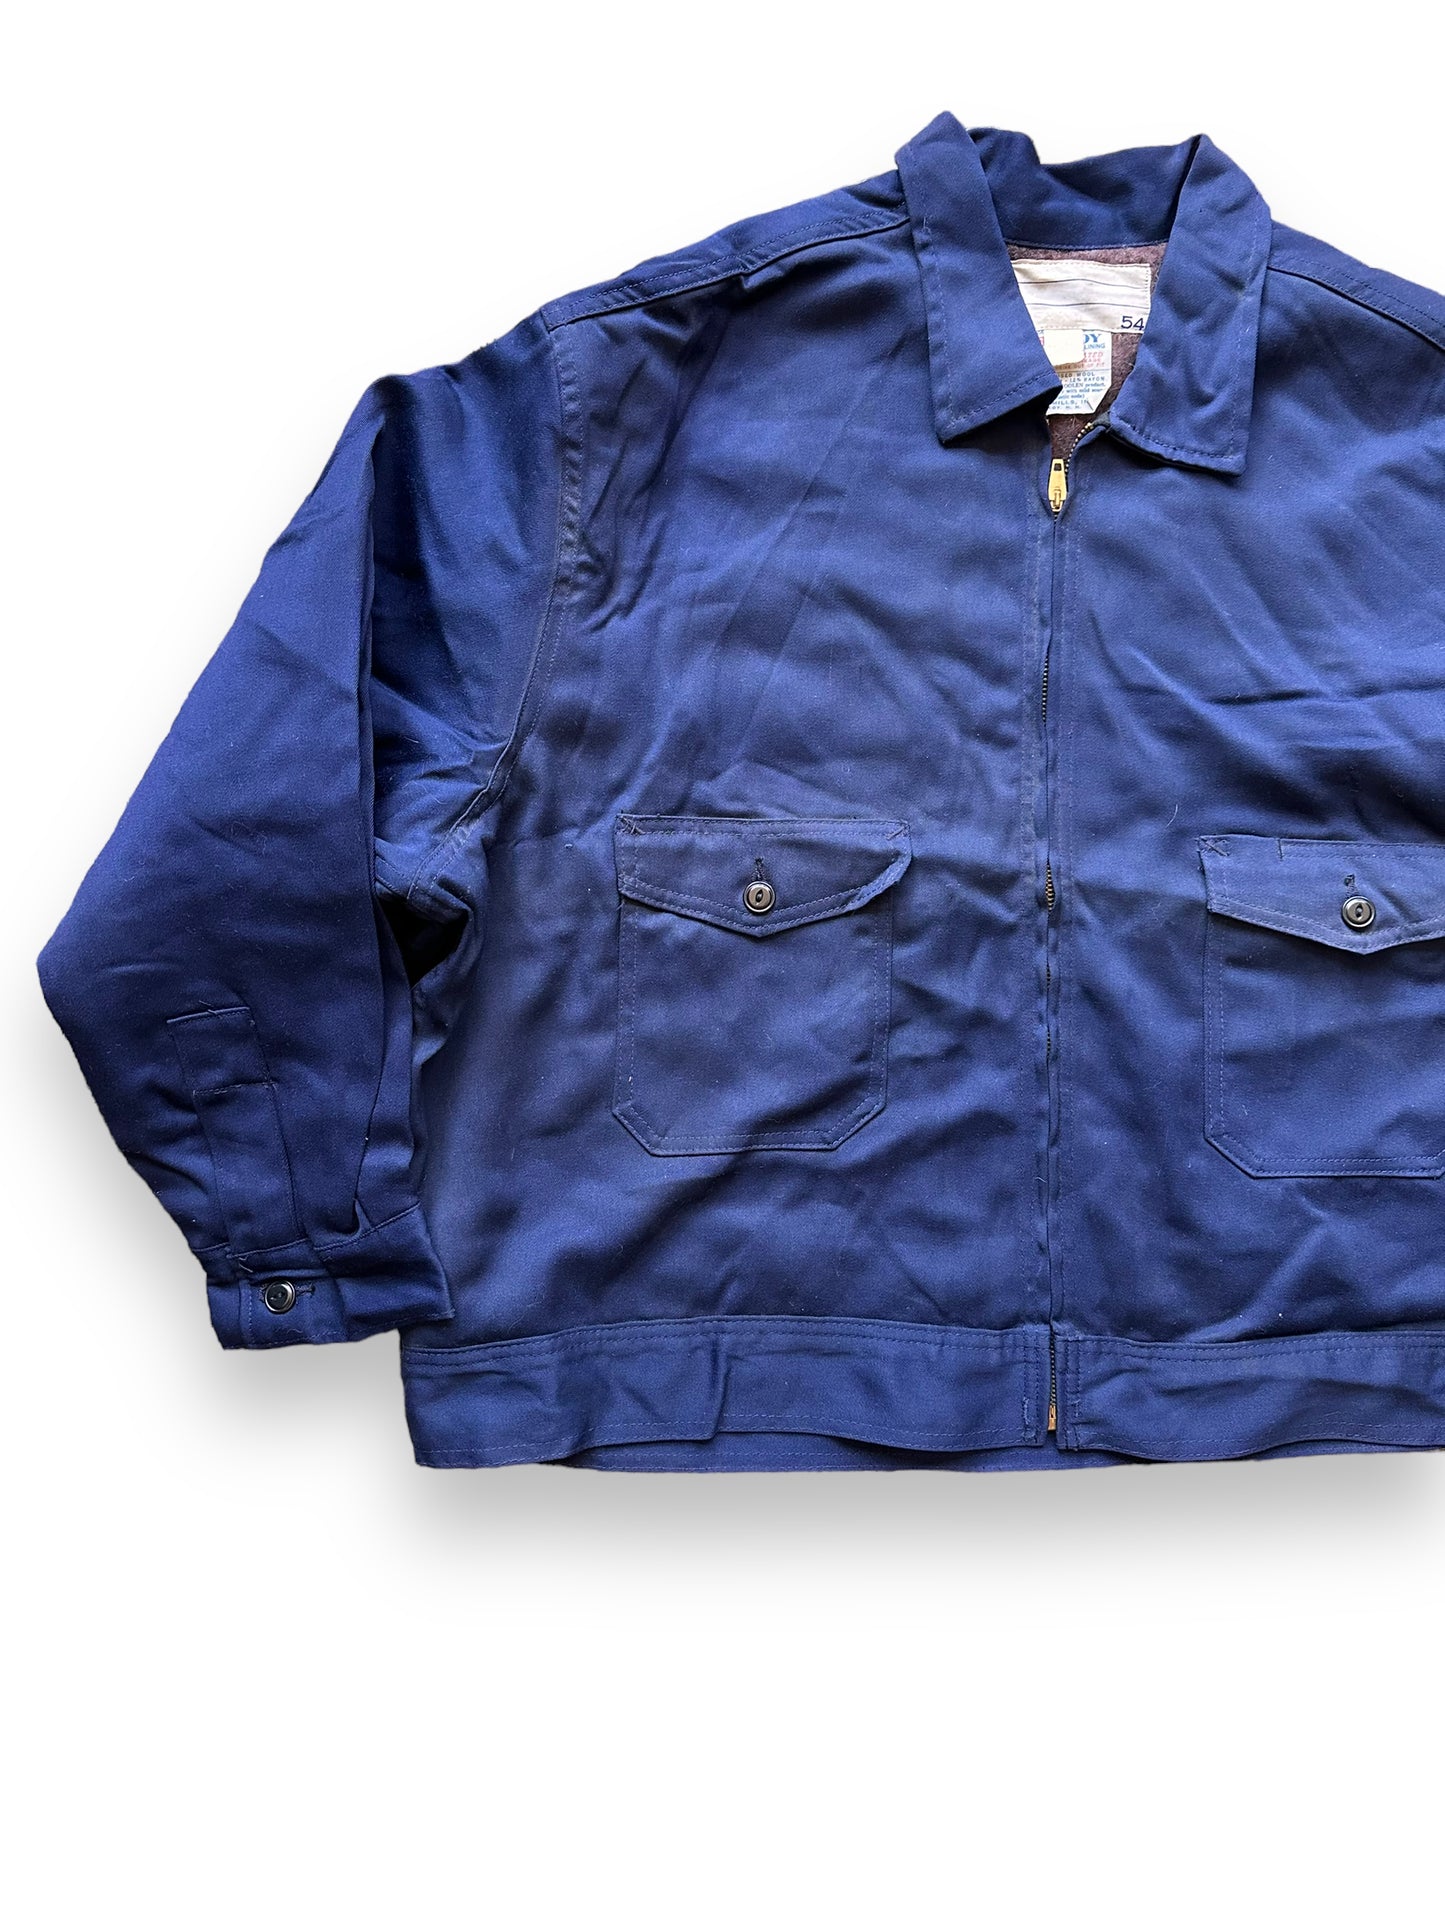 Front Right View of Vintage Blue Troy Blanket Lined Gas Station Jacket SZ 54 | Vintage Workwear Jacket Seattle | Seattle Vintage Clothing